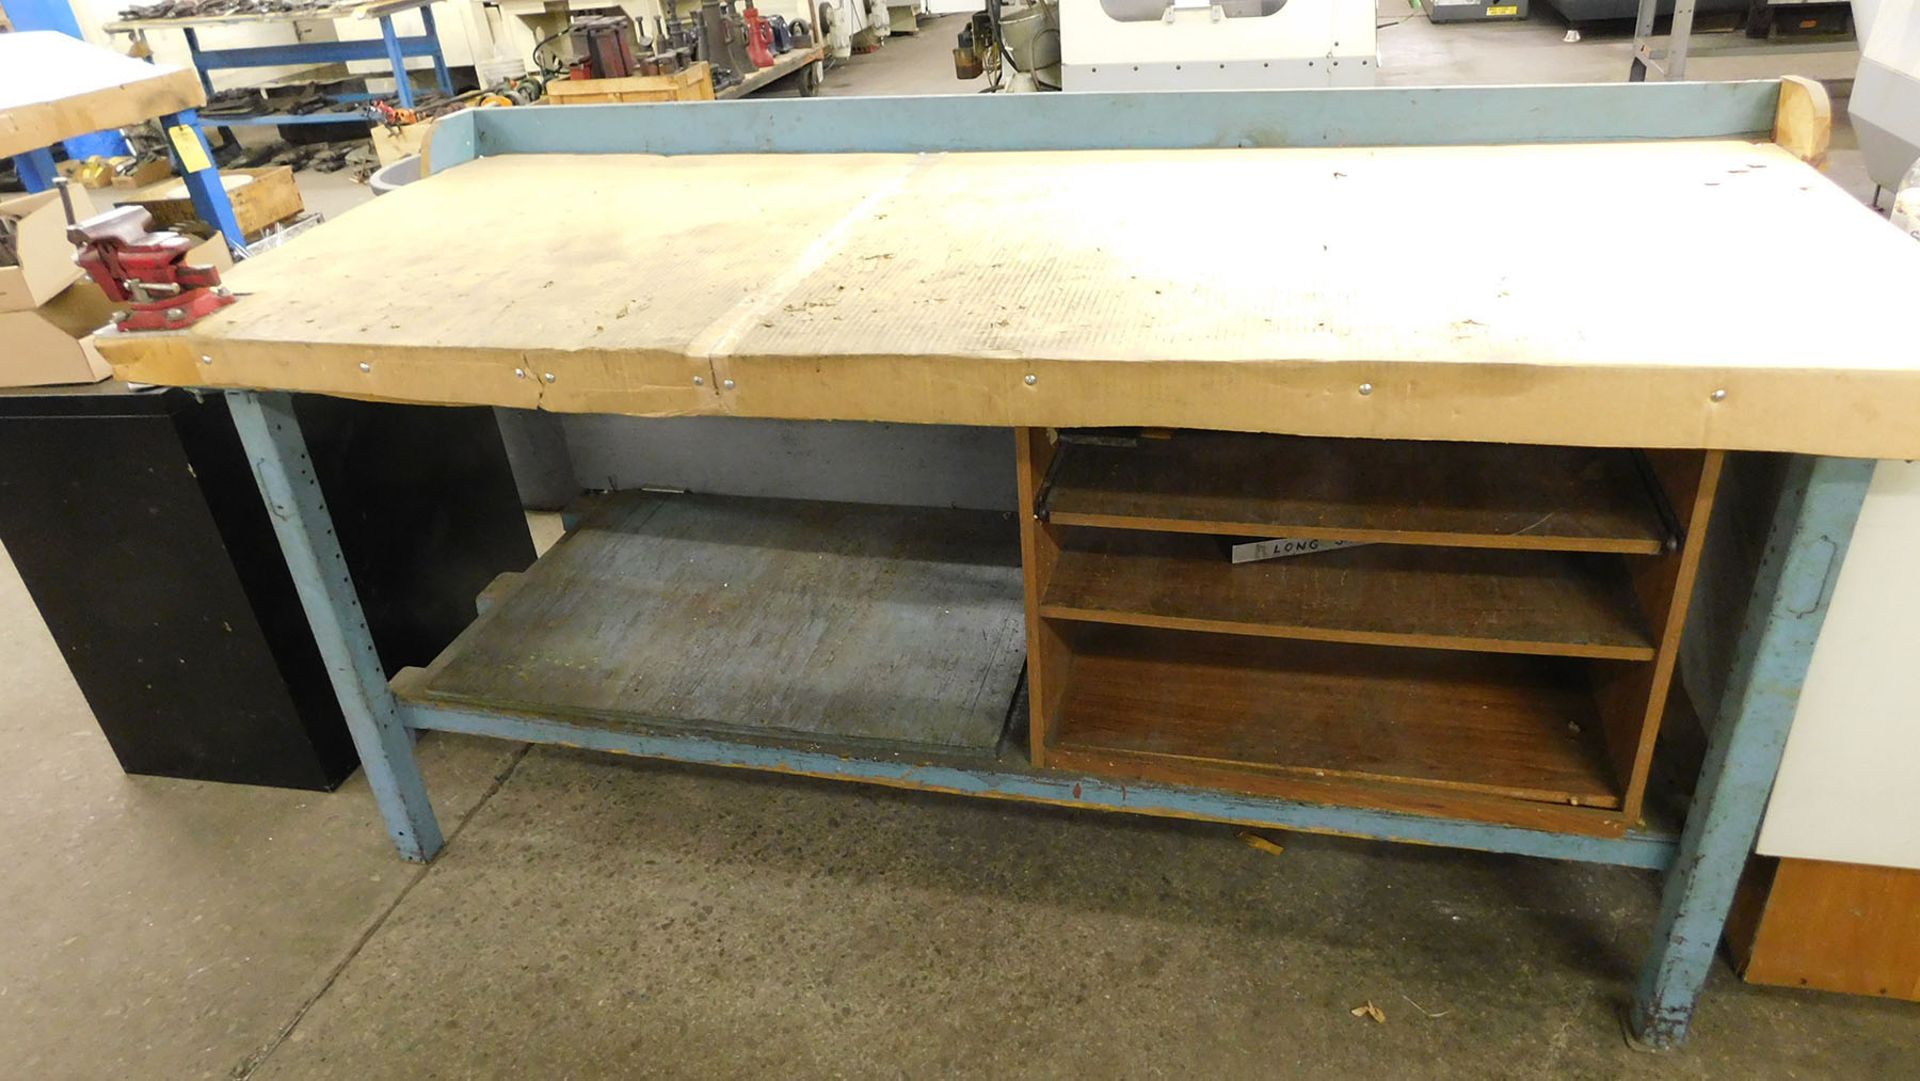 6 1/2' X 3' WOOD WORK BENCH WITH SWIVEL VISE